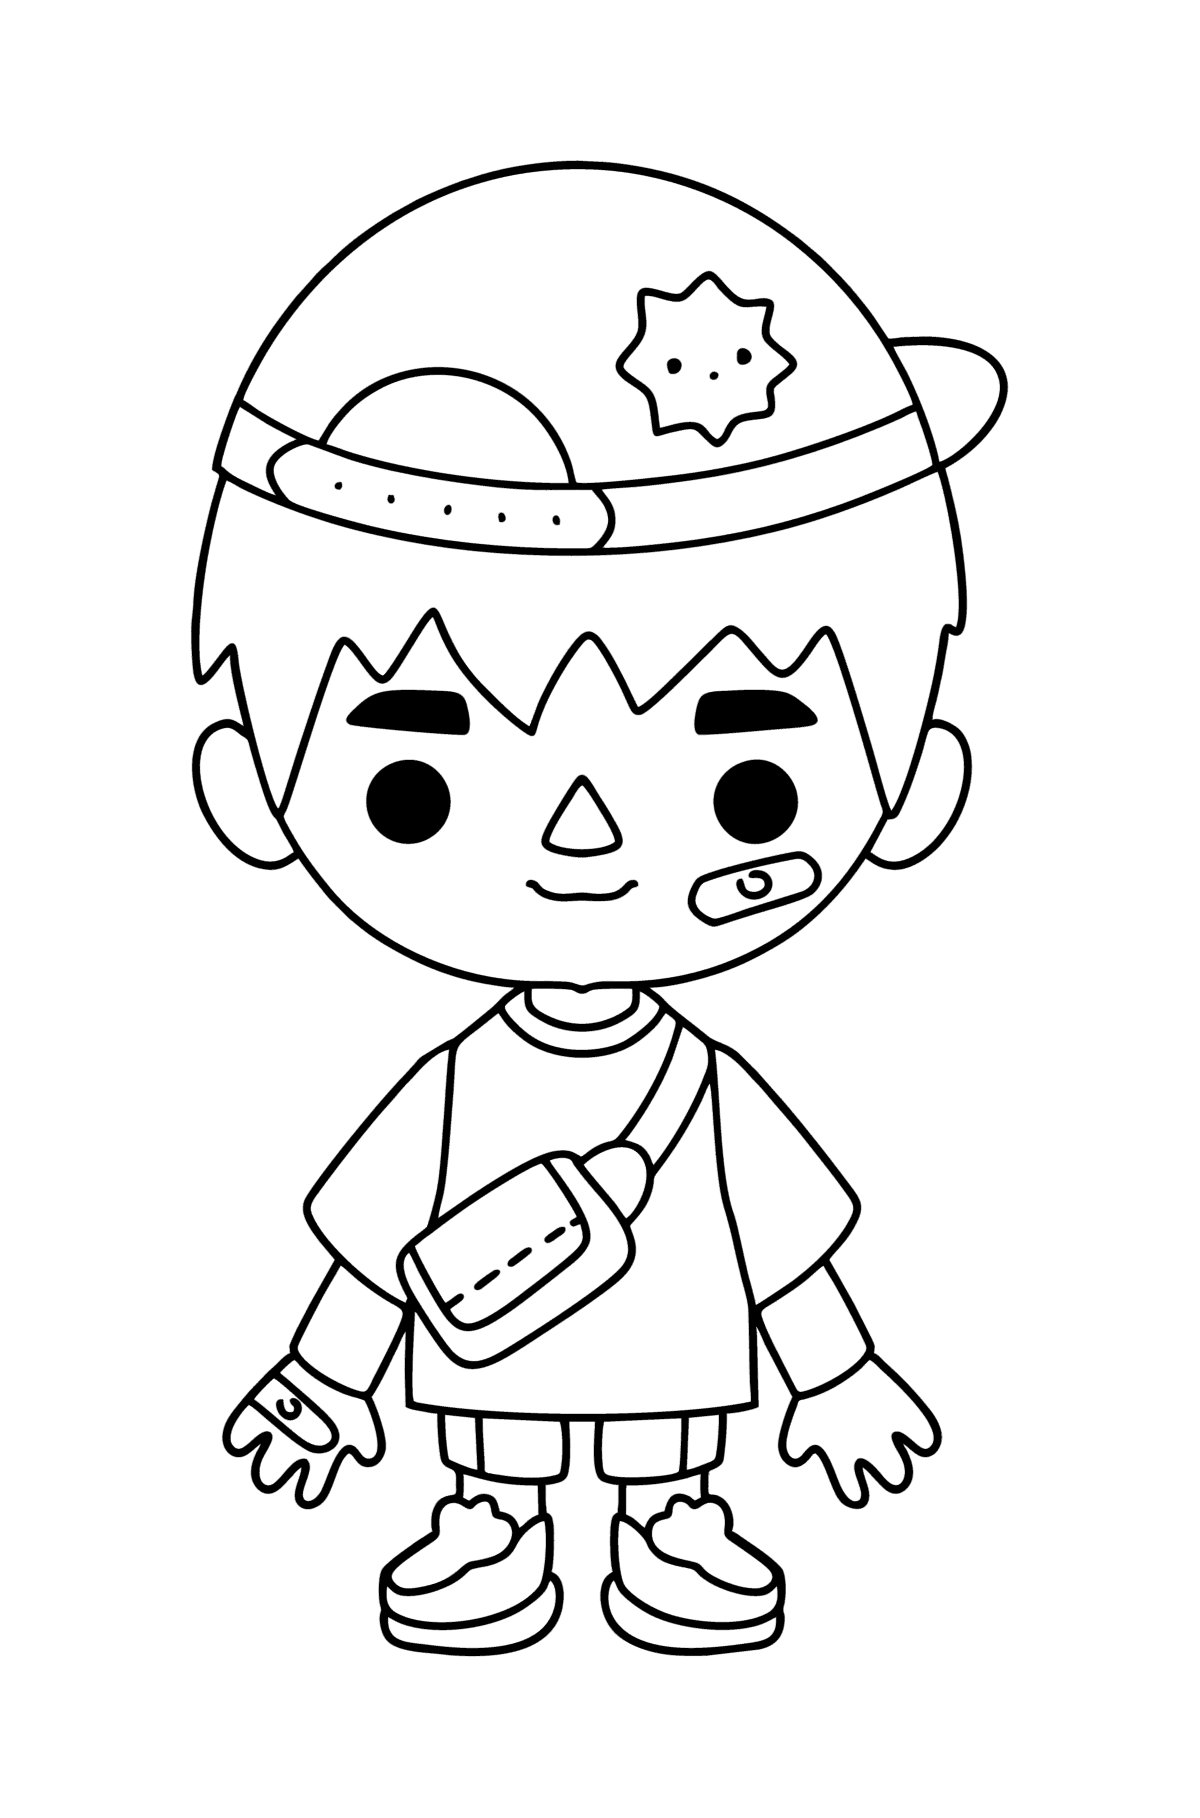 Coloring page Boy tocaboca 04 - Coloring Pages for Kids